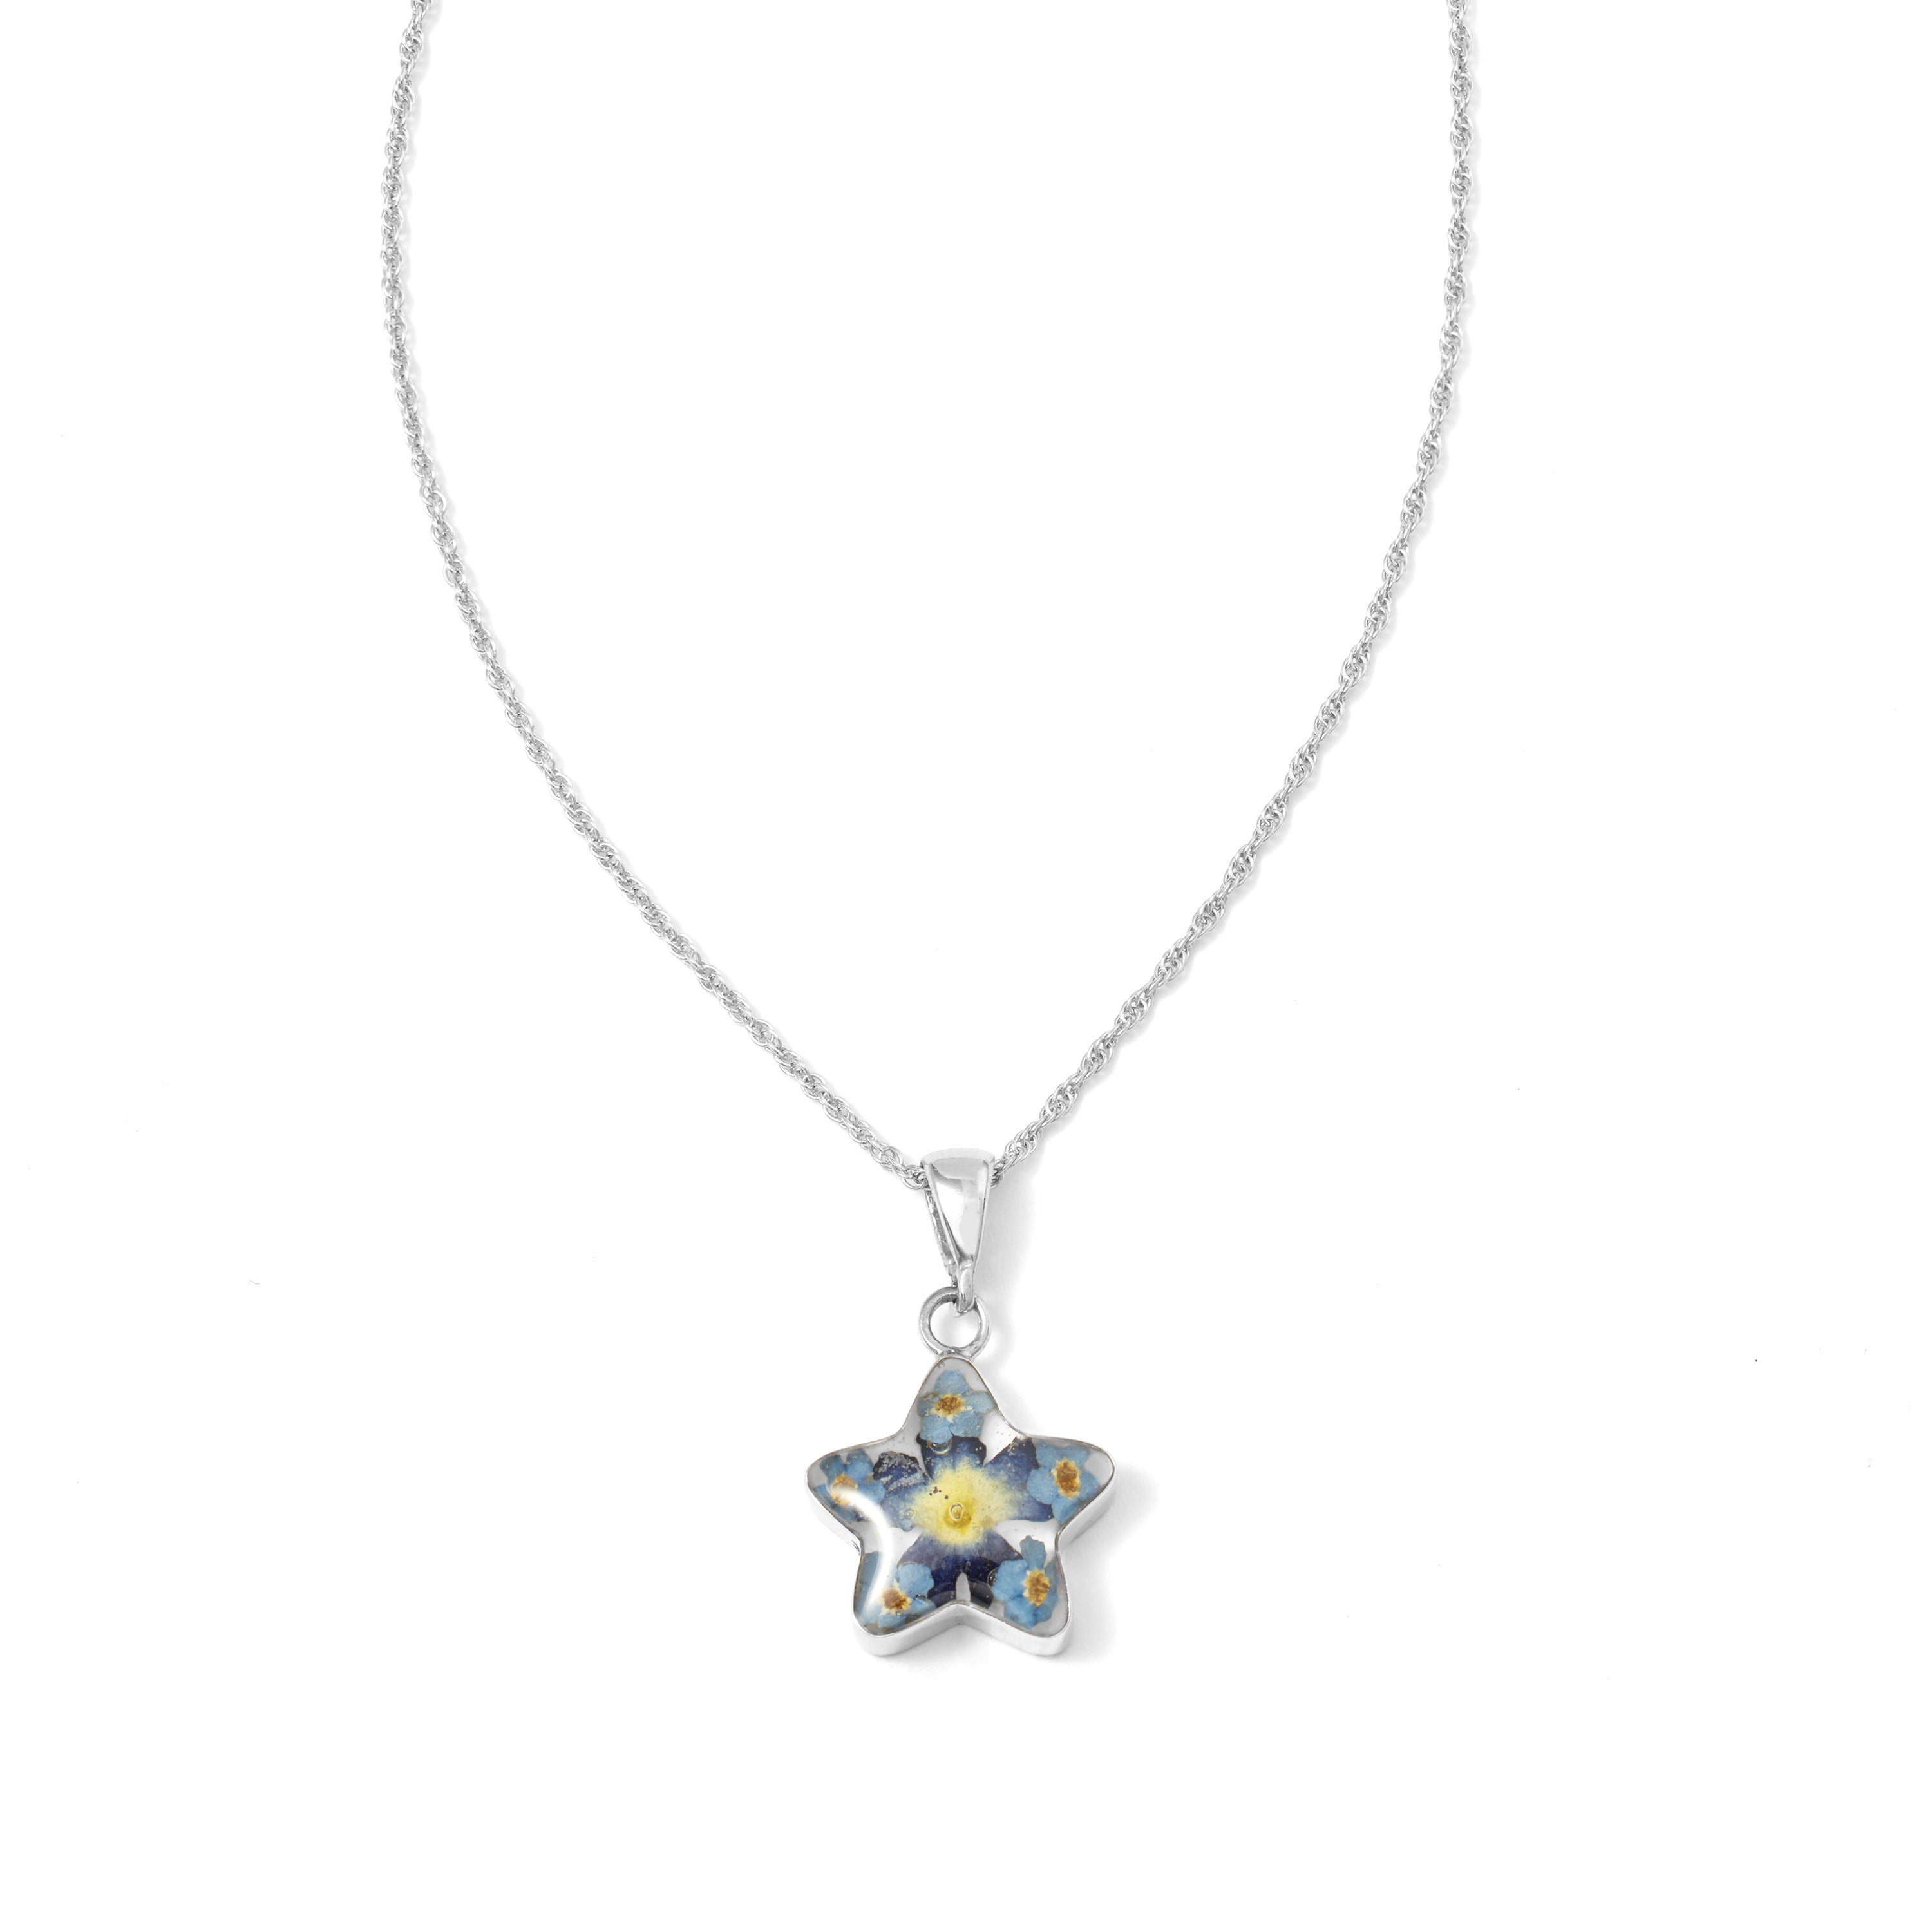 Starry Dream Necklace